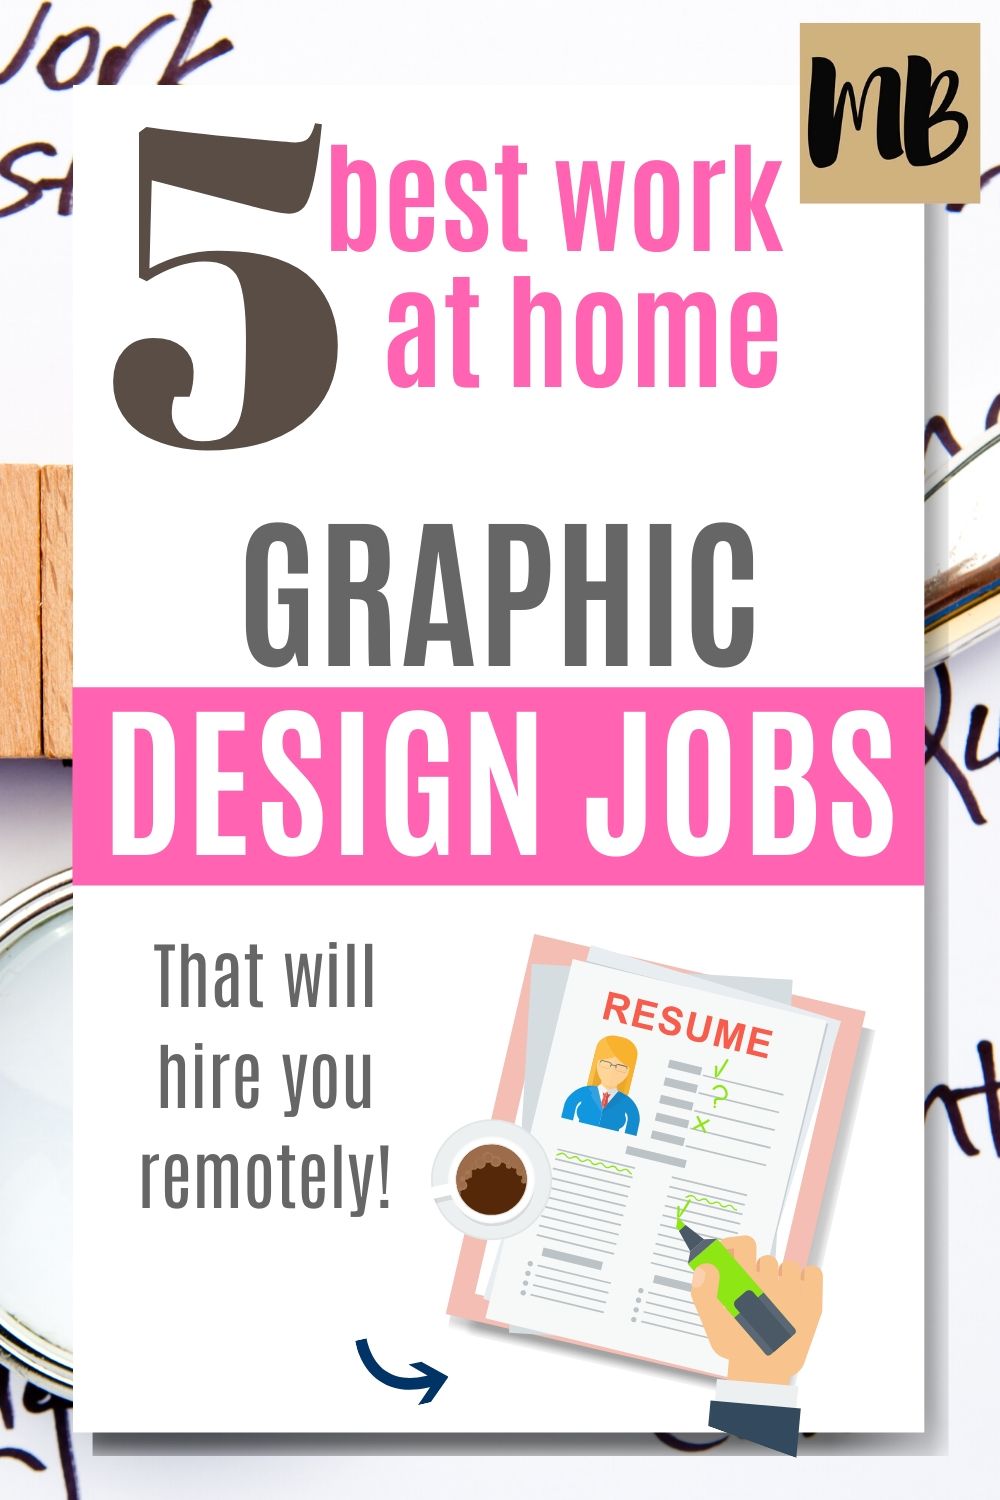 Web design jobs work from home